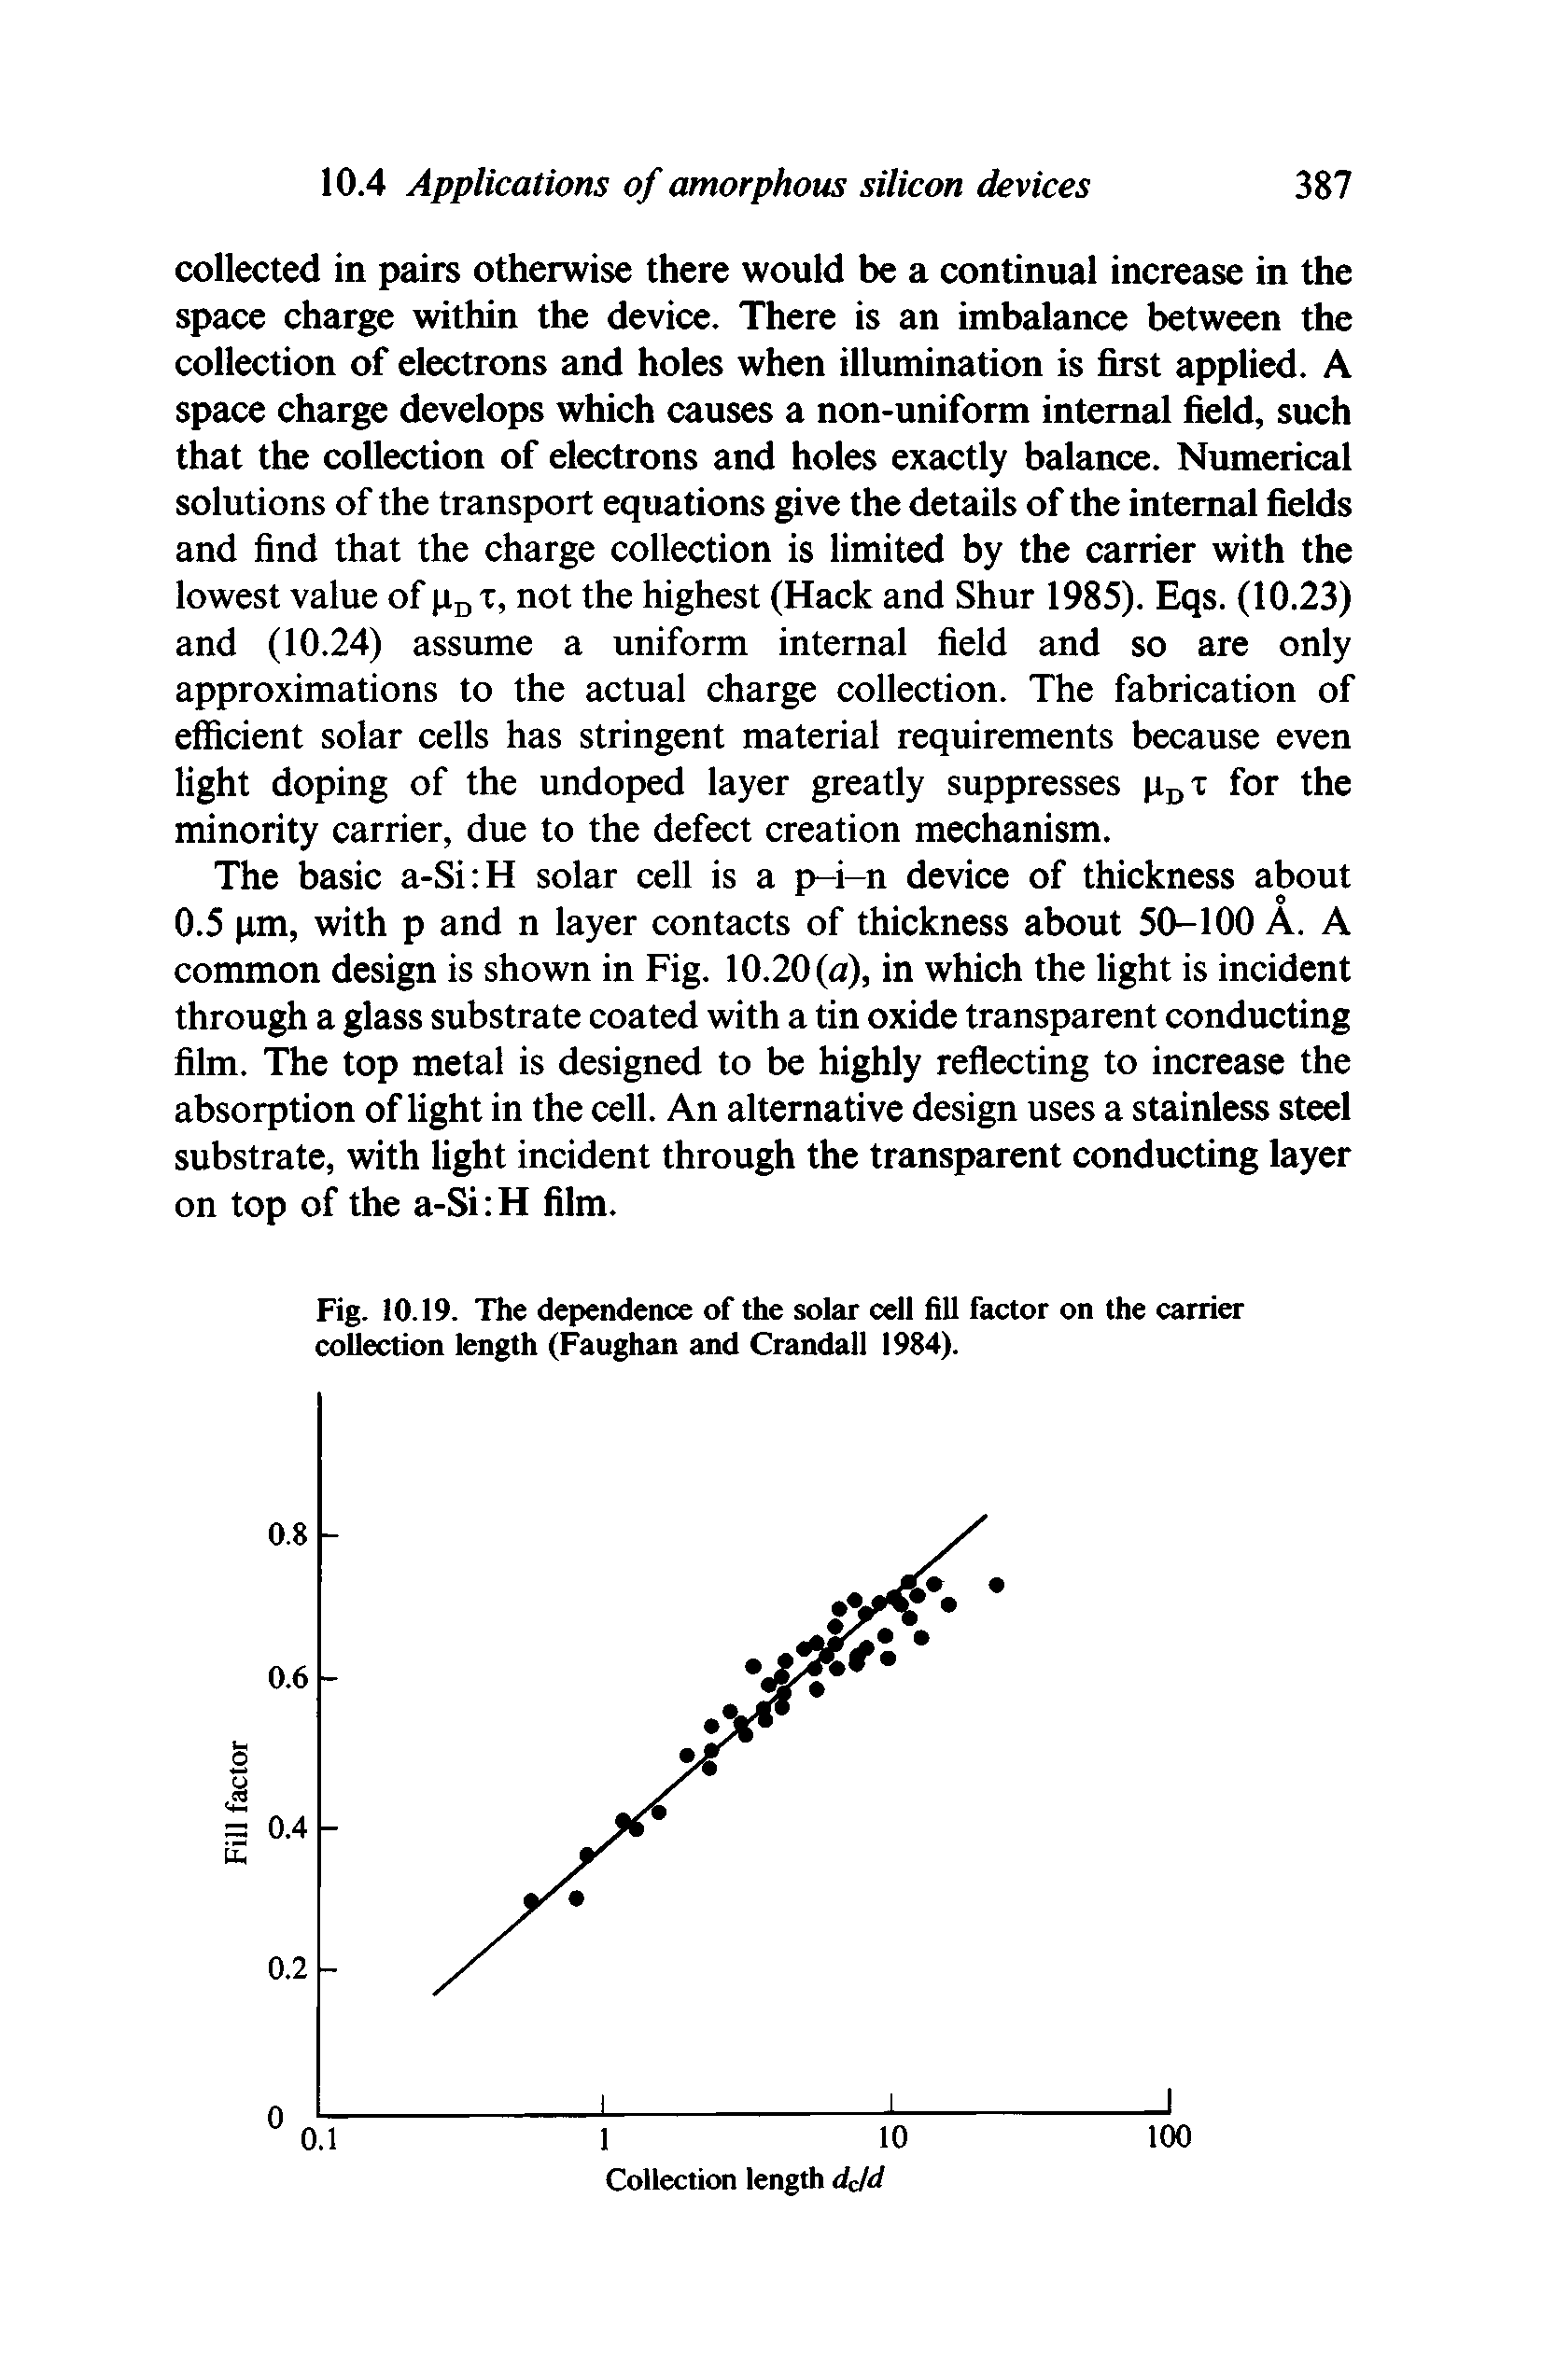 Fig. 10.19. The dependence of the solar cell fill factor on the carrier collection length (Faughan and Crandall 1984).